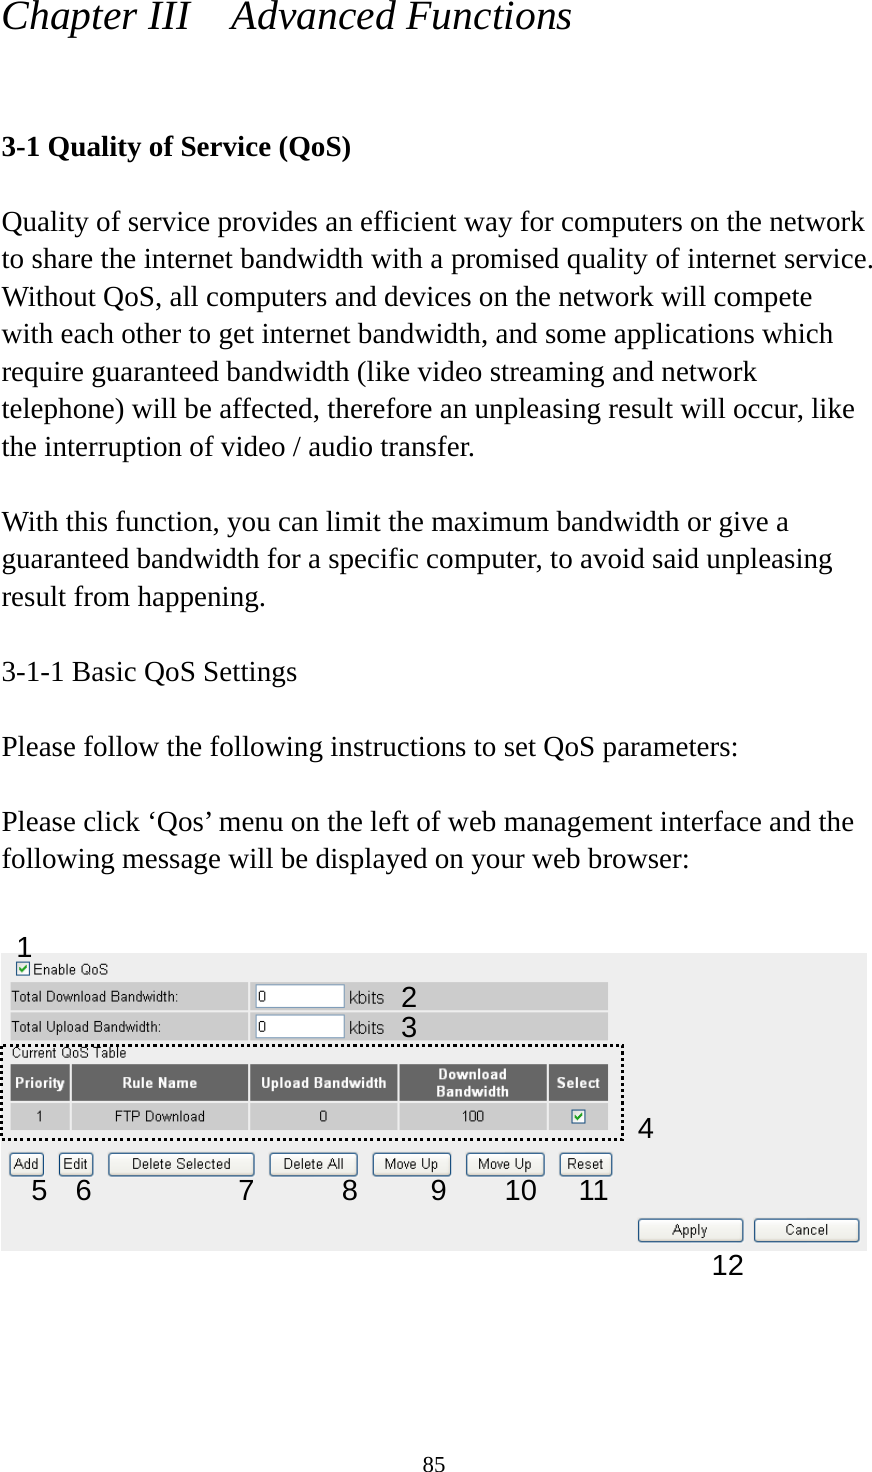 85 Chapter III    Advanced Functions  3-1 Quality of Service (QoS)  Quality of service provides an efficient way for computers on the network to share the internet bandwidth with a promised quality of internet service. Without QoS, all computers and devices on the network will compete with each other to get internet bandwidth, and some applications which require guaranteed bandwidth (like video streaming and network telephone) will be affected, therefore an unpleasing result will occur, like the interruption of video / audio transfer.    With this function, you can limit the maximum bandwidth or give a guaranteed bandwidth for a specific computer, to avoid said unpleasing result from happening.  3-1-1 Basic QoS Settings  Please follow the following instructions to set QoS parameters:  Please click ‘Qos’ menu on the left of web management interface and the following message will be displayed on your web browser:        1 2 34 5 6  7  8 9 10 1112 